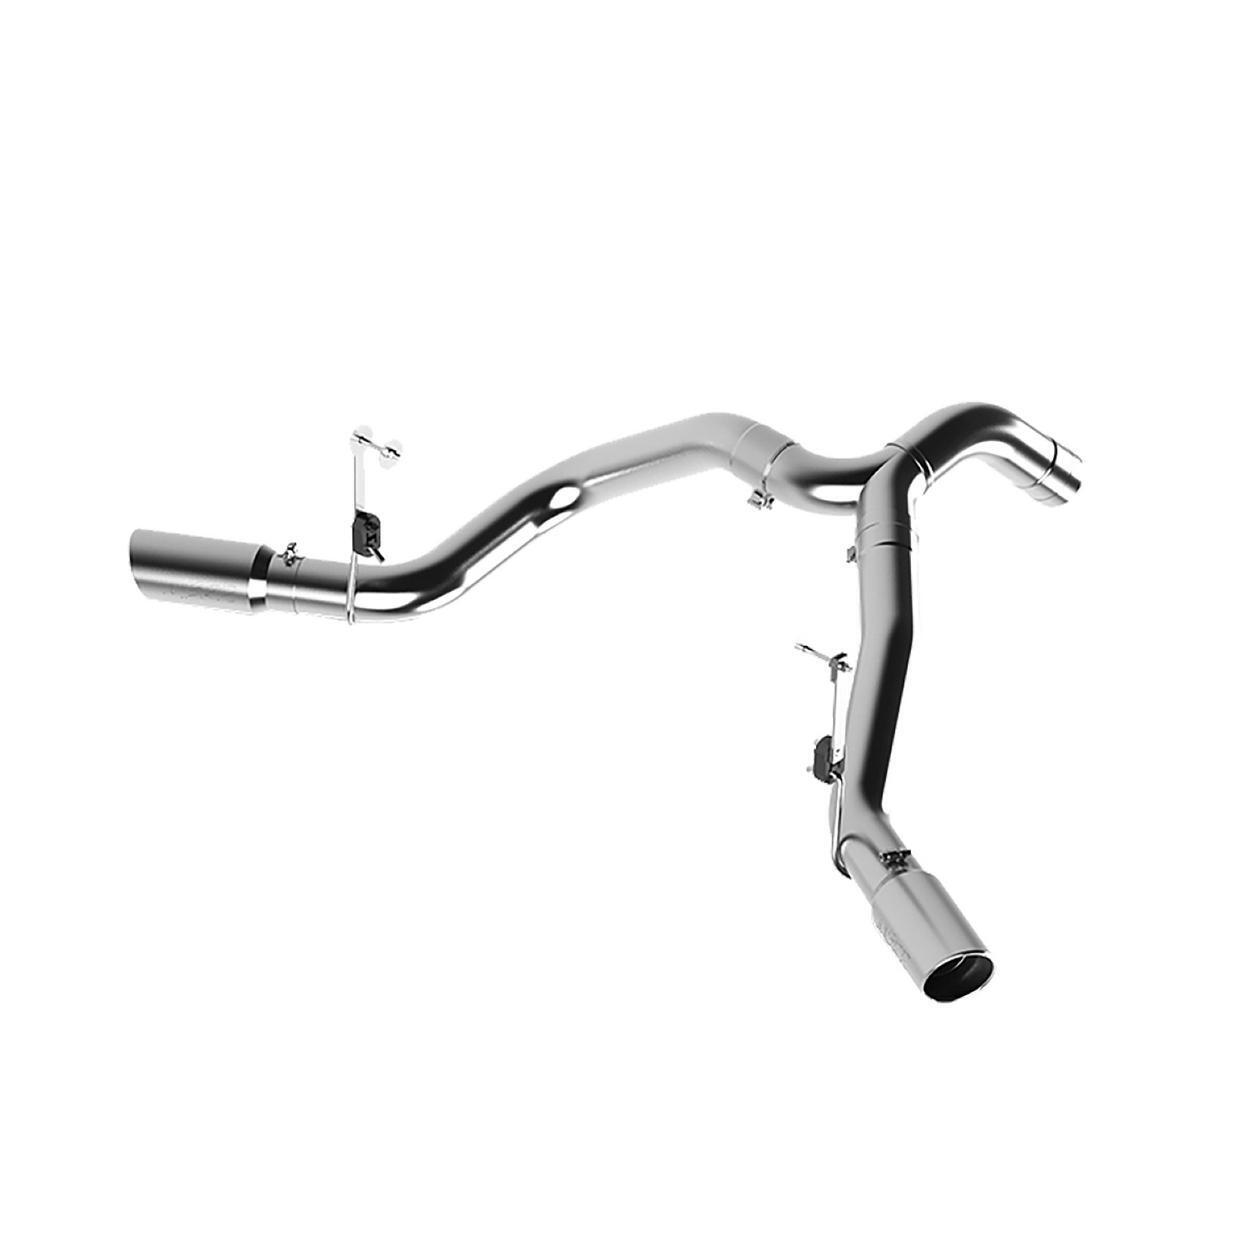 Exhaust System Kit for 2019 Ram 3500